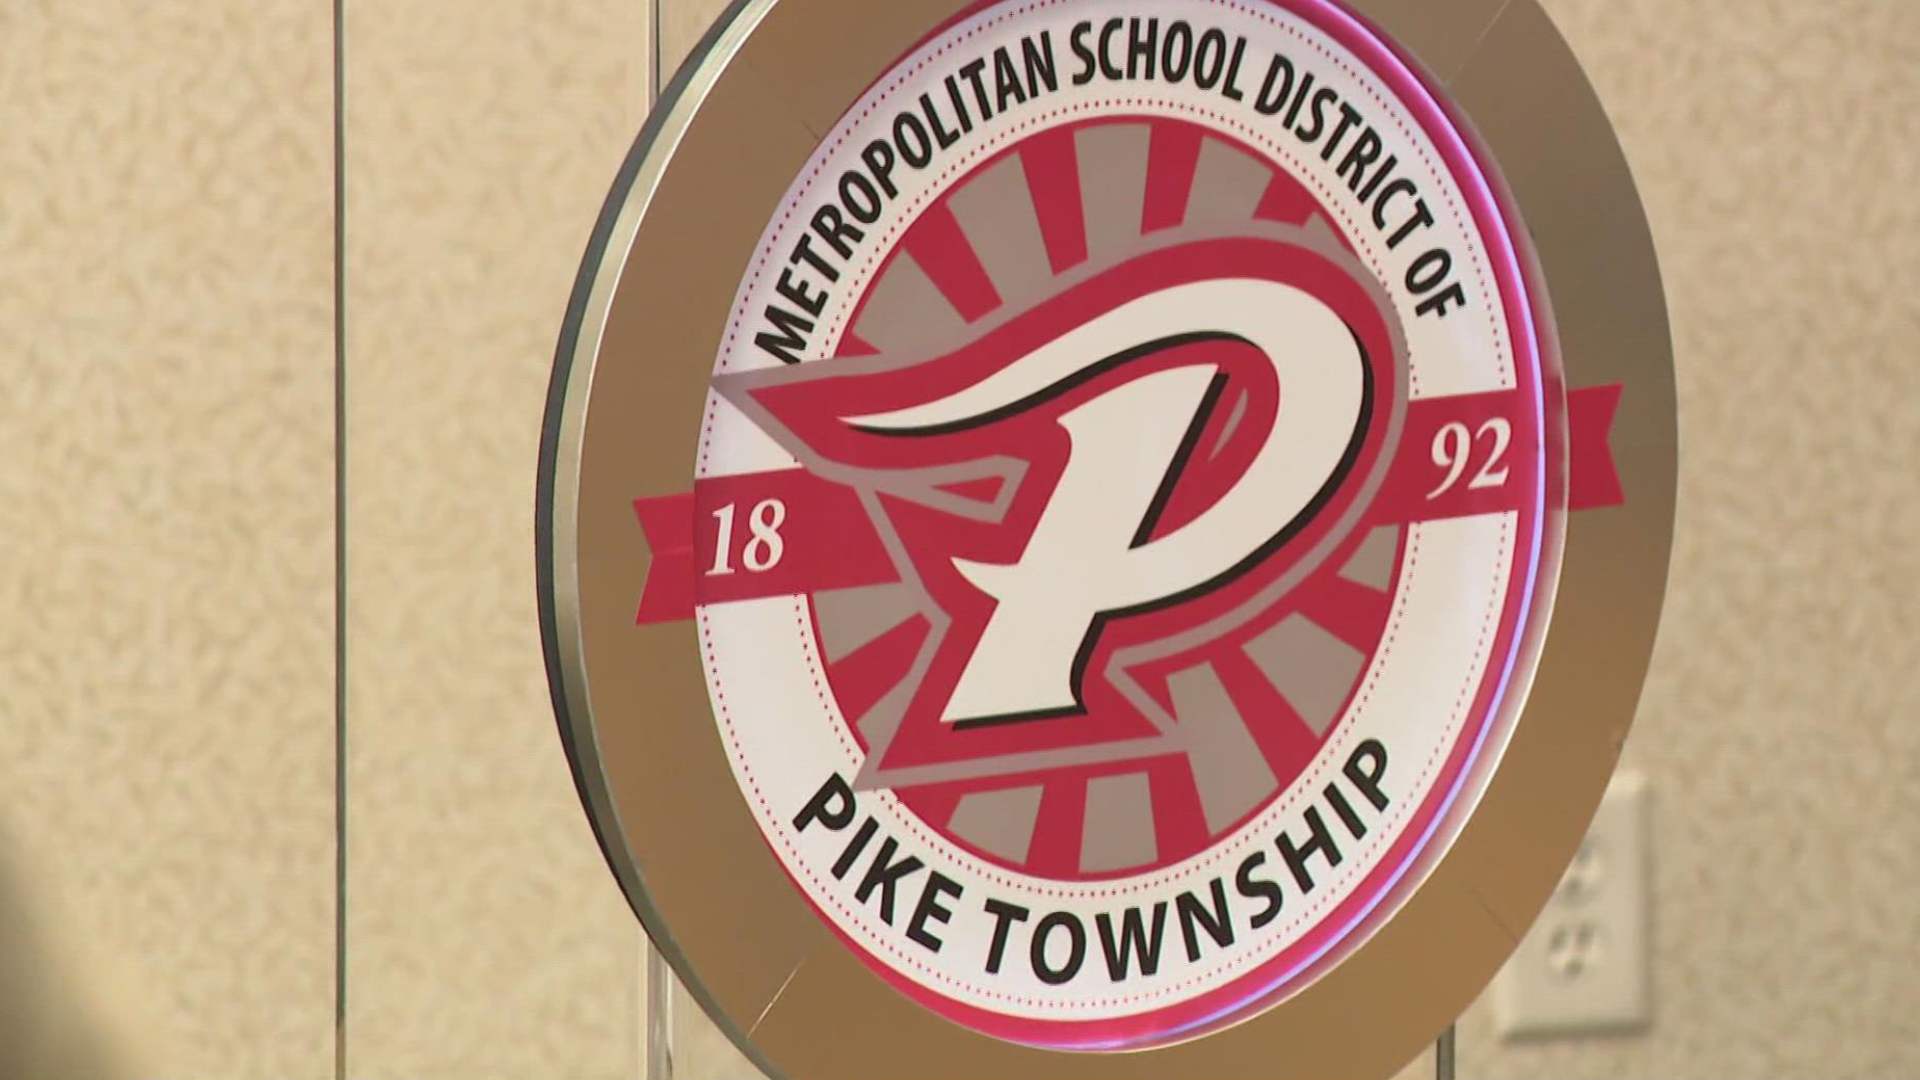 The Pike Township school board is moving on from former Superintendent Dr. Flora Reichanadter.